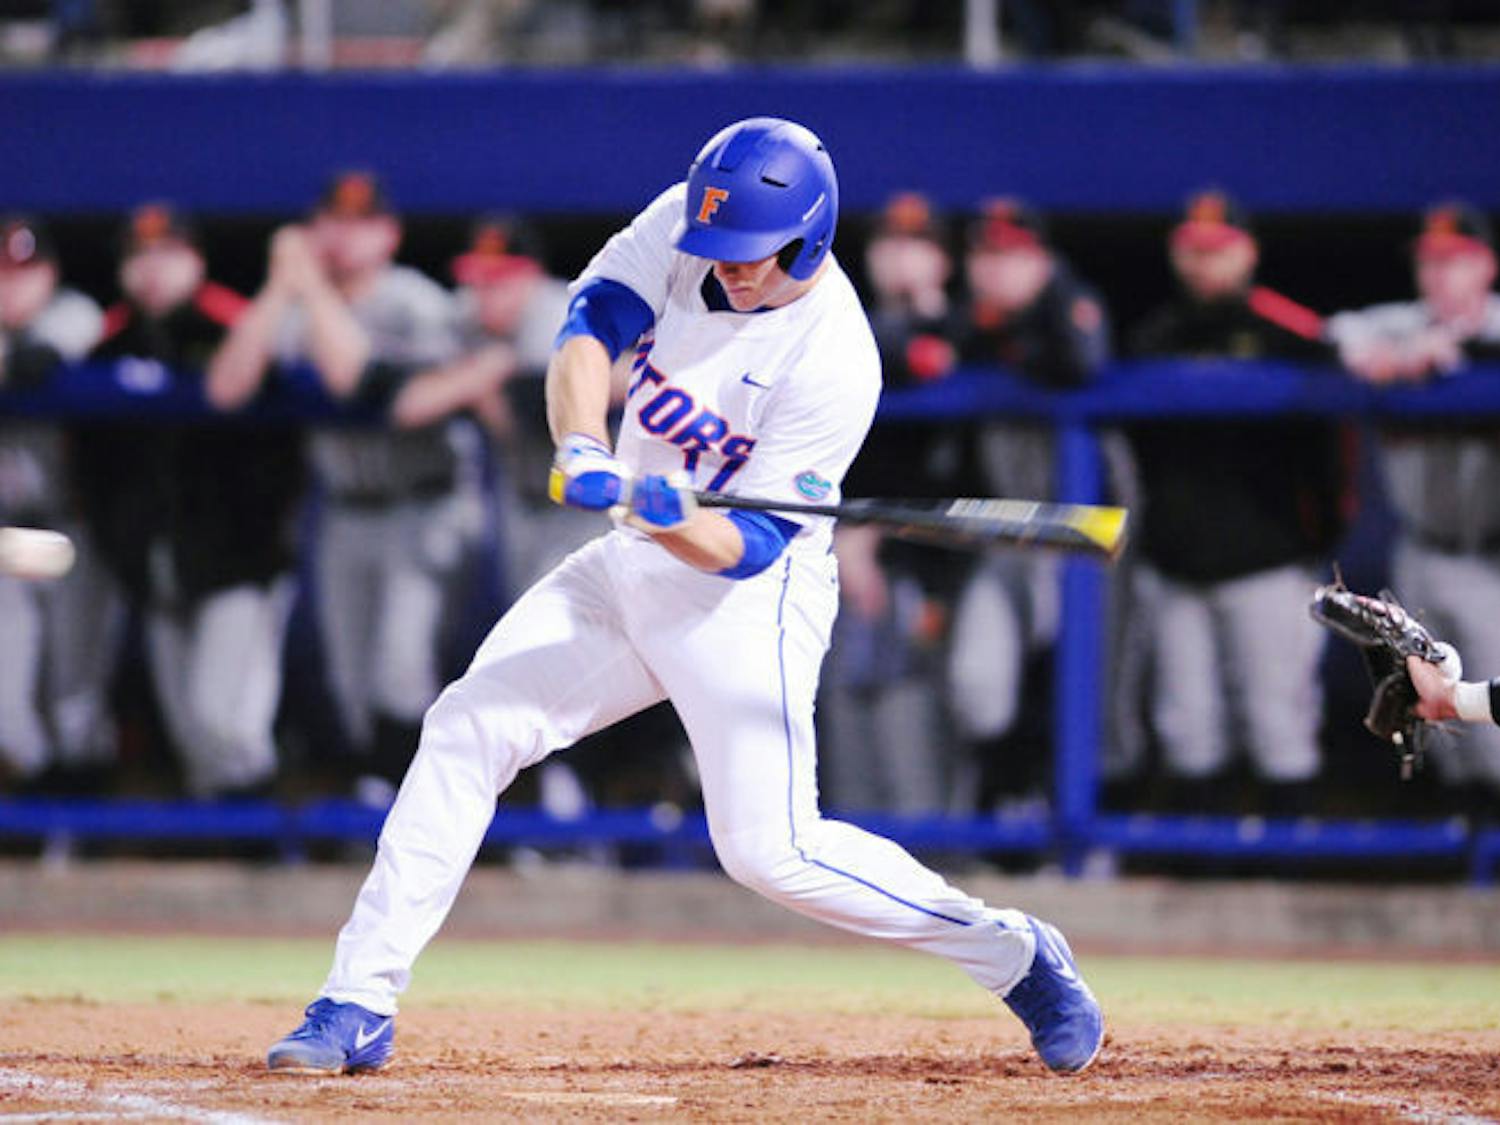 Taylor Gushue swings at a pitch during Florida’s 4-0 win against Maryland on Friday at McKethan Stadium.&nbsp;